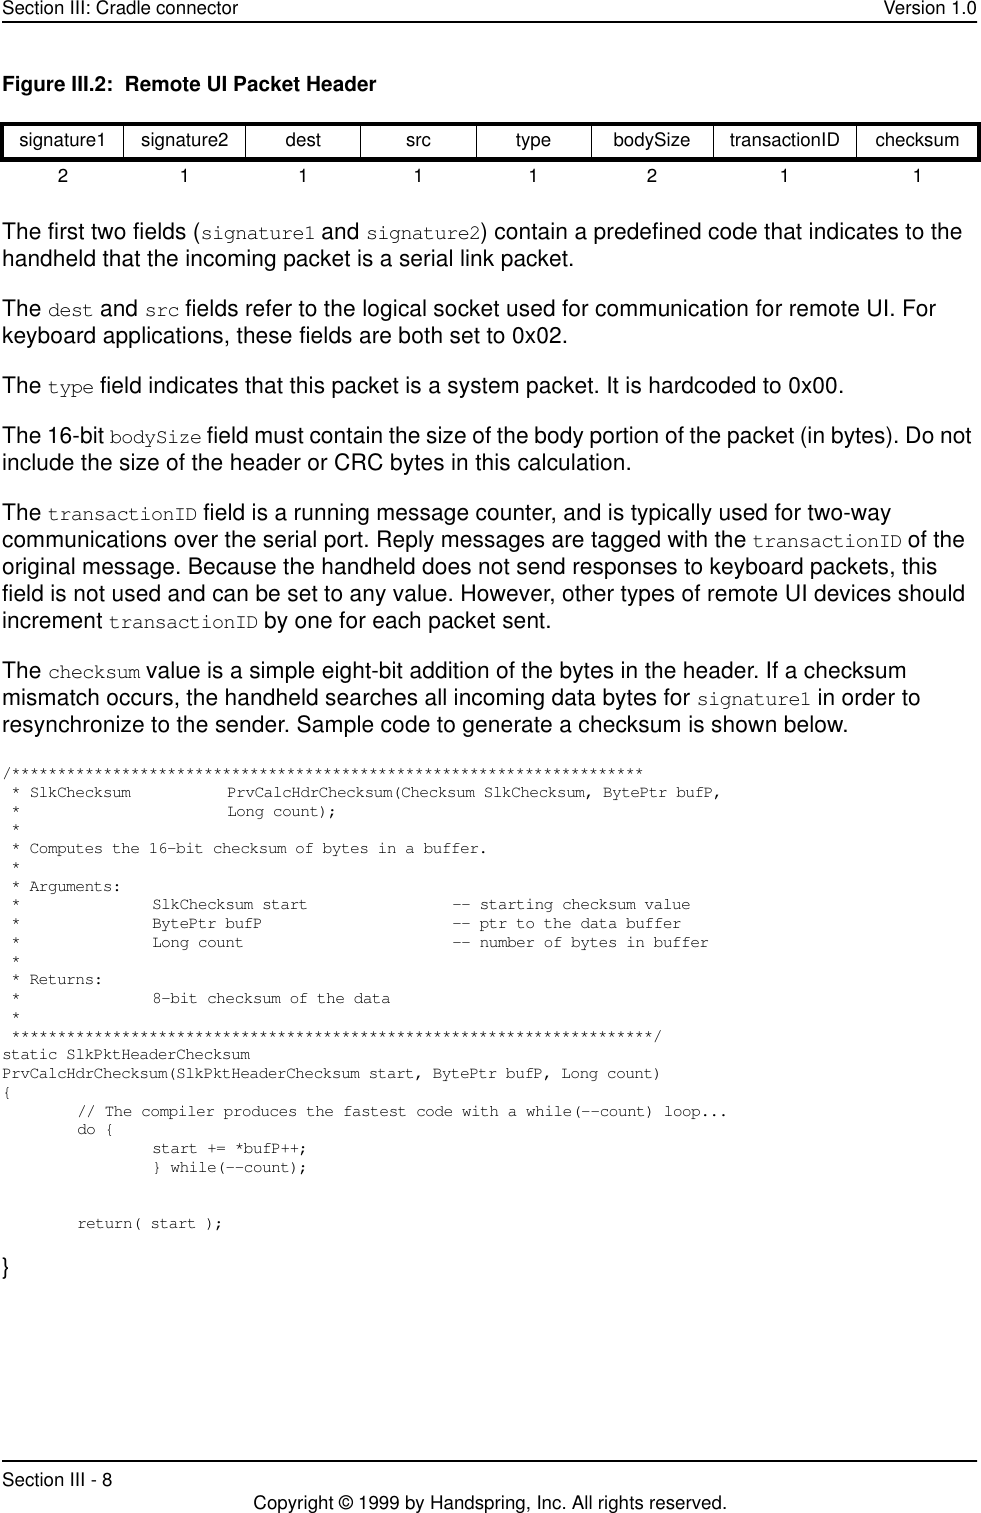 Section III: Cradle connector Version 1.0Section III - 8 Copyright © 1999 by Handspring, Inc. All rights reserved.Figure III.2:  Remote UI Packet HeaderThe first two fields (signature1 and signature2) contain a predefined code that indicates to the handheld that the incoming packet is a serial link packet. The dest and src fields refer to the logical socket used for communication for remote UI. For keyboard applications, these fields are both set to 0x02.   The type field indicates that this packet is a system packet. It is hardcoded to 0x00.   The 16-bit bodySize field must contain the size of the body portion of the packet (in bytes). Do not include the size of the header or CRC bytes in this calculation.   The transactionID field is a running message counter, and is typically used for two-way communications over the serial port. Reply messages are tagged with the transactionID of the original message. Because the handheld does not send responses to keyboard packets, this field is not used and can be set to any value. However, other types of remote UI devices should increment transactionID by one for each packet sent. The checksum value is a simple eight-bit addition of the bytes in the header. If a checksum mismatch occurs, the handheld searches all incoming data bytes for signature1 in order to resynchronize to the sender. Sample code to generate a checksum is shown below./********************************************************************* * SlkChecksum PrvCalcHdrChecksum(Checksum SlkChecksum, BytePtr bufP, * Long count); * * Computes the 16-bit checksum of bytes in a buffer. * * Arguments: * SlkChecksum start -- starting checksum value * BytePtr bufP -- ptr to the data buffer * Long count -- number of bytes in buffer * * Returns: * 8-bit checksum of the data * **********************************************************************/static SlkPktHeaderChecksumPrvCalcHdrChecksum(SlkPktHeaderChecksum start, BytePtr bufP, Long count){// The compiler produces the fastest code with a while(--count) loop...do {start += *bufP++;} while(--count);return( start );}signature1 signature2 dest src type bodySize transactionID checksum211112 1 1